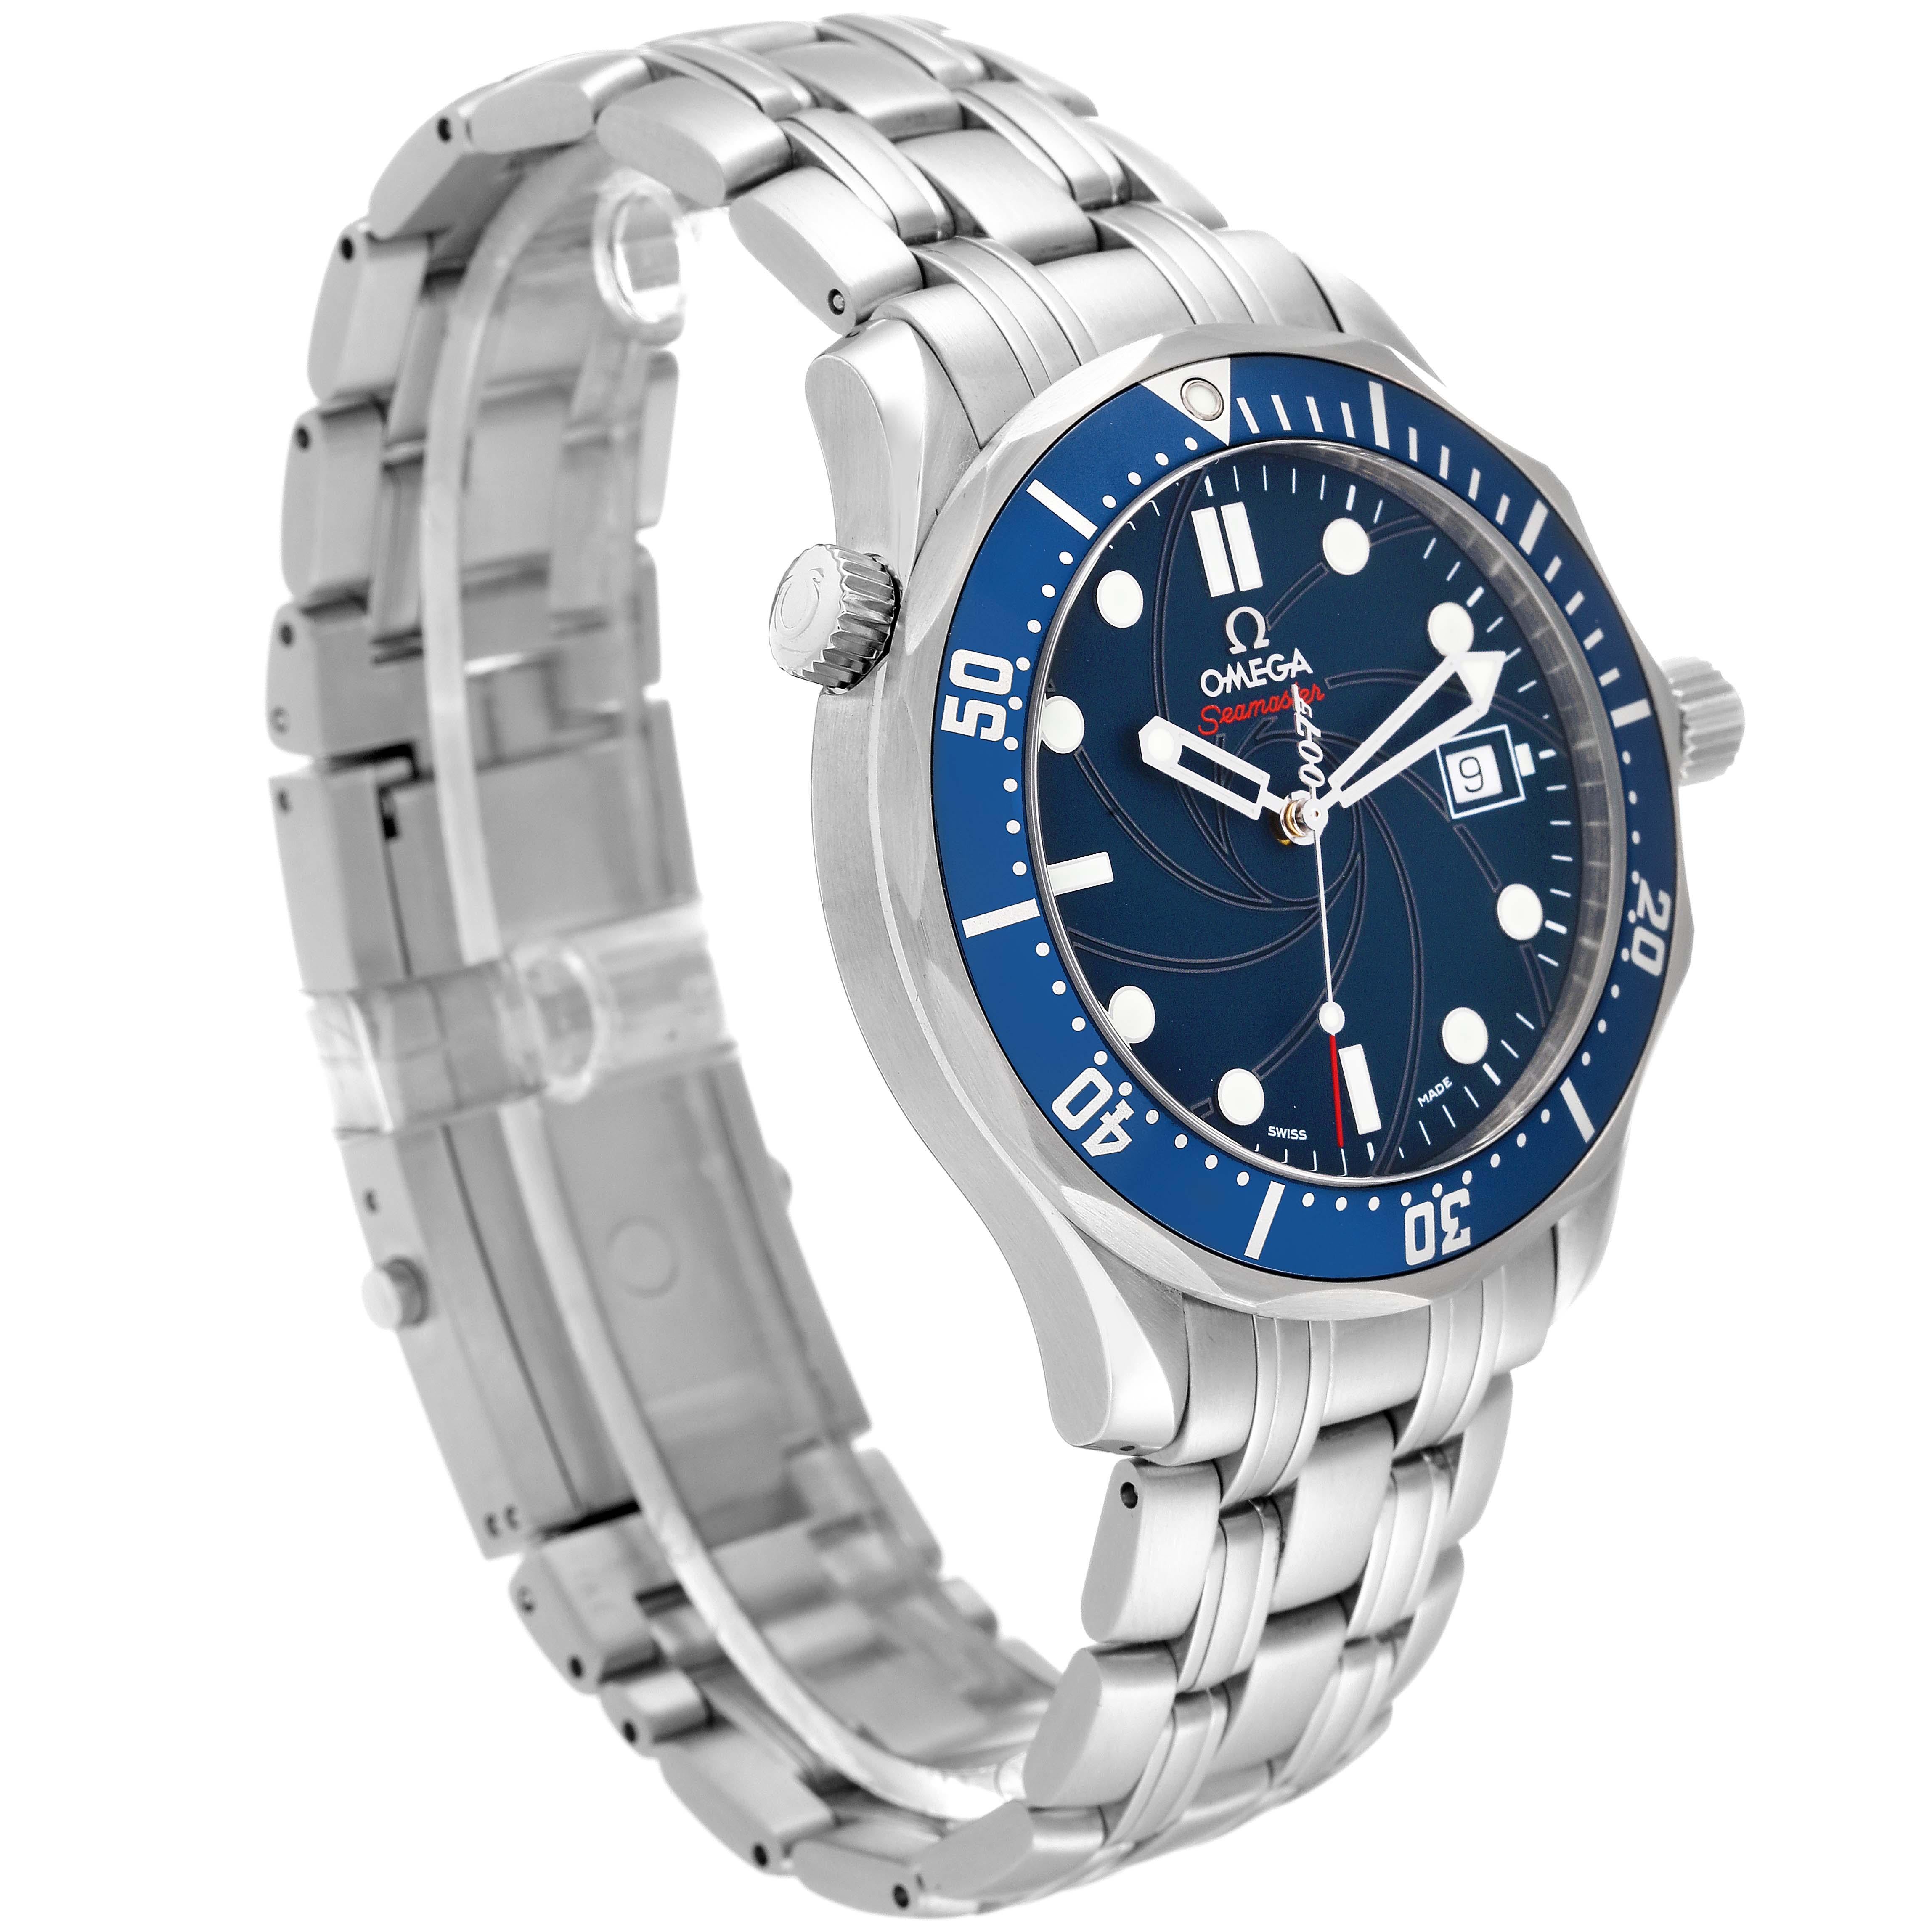 Omega Seamaster Bond 007 Limited Edition Steel Mens Watch 2226.80.00 Box Card For Sale 6